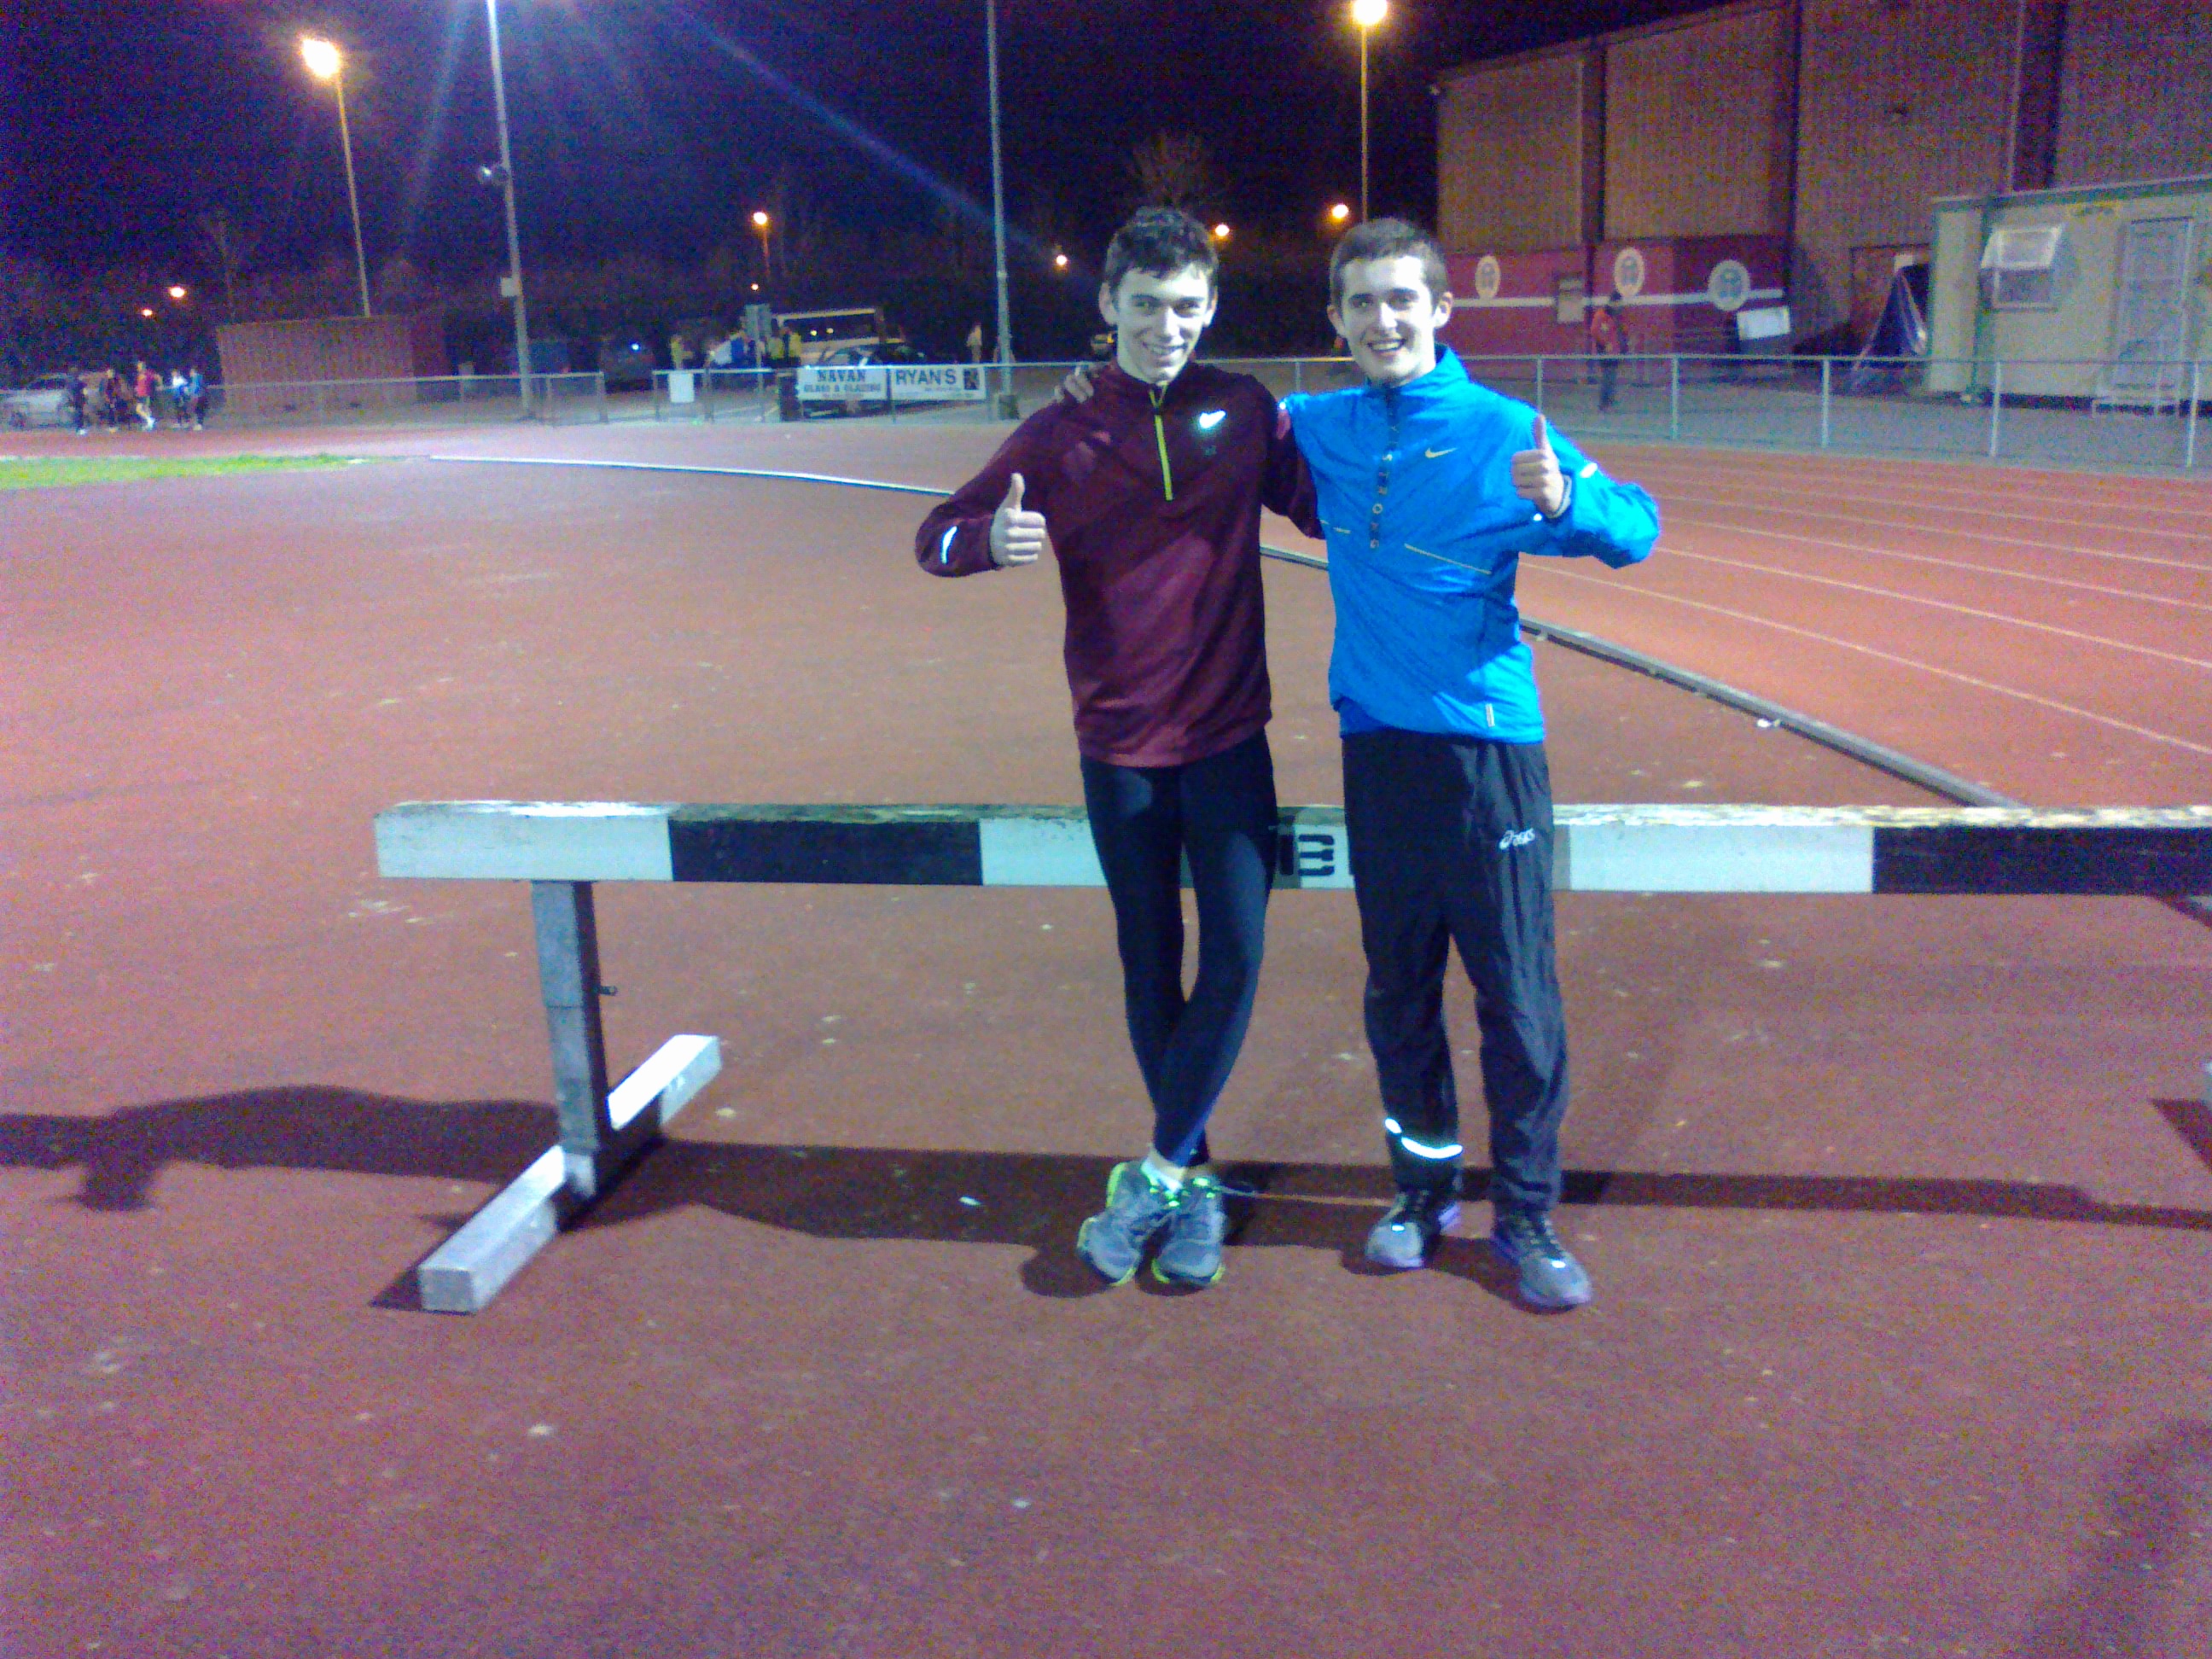 rob-cormac-after-setting-new-pbs-in-the-1500m-claremont-stadium-21-03-12